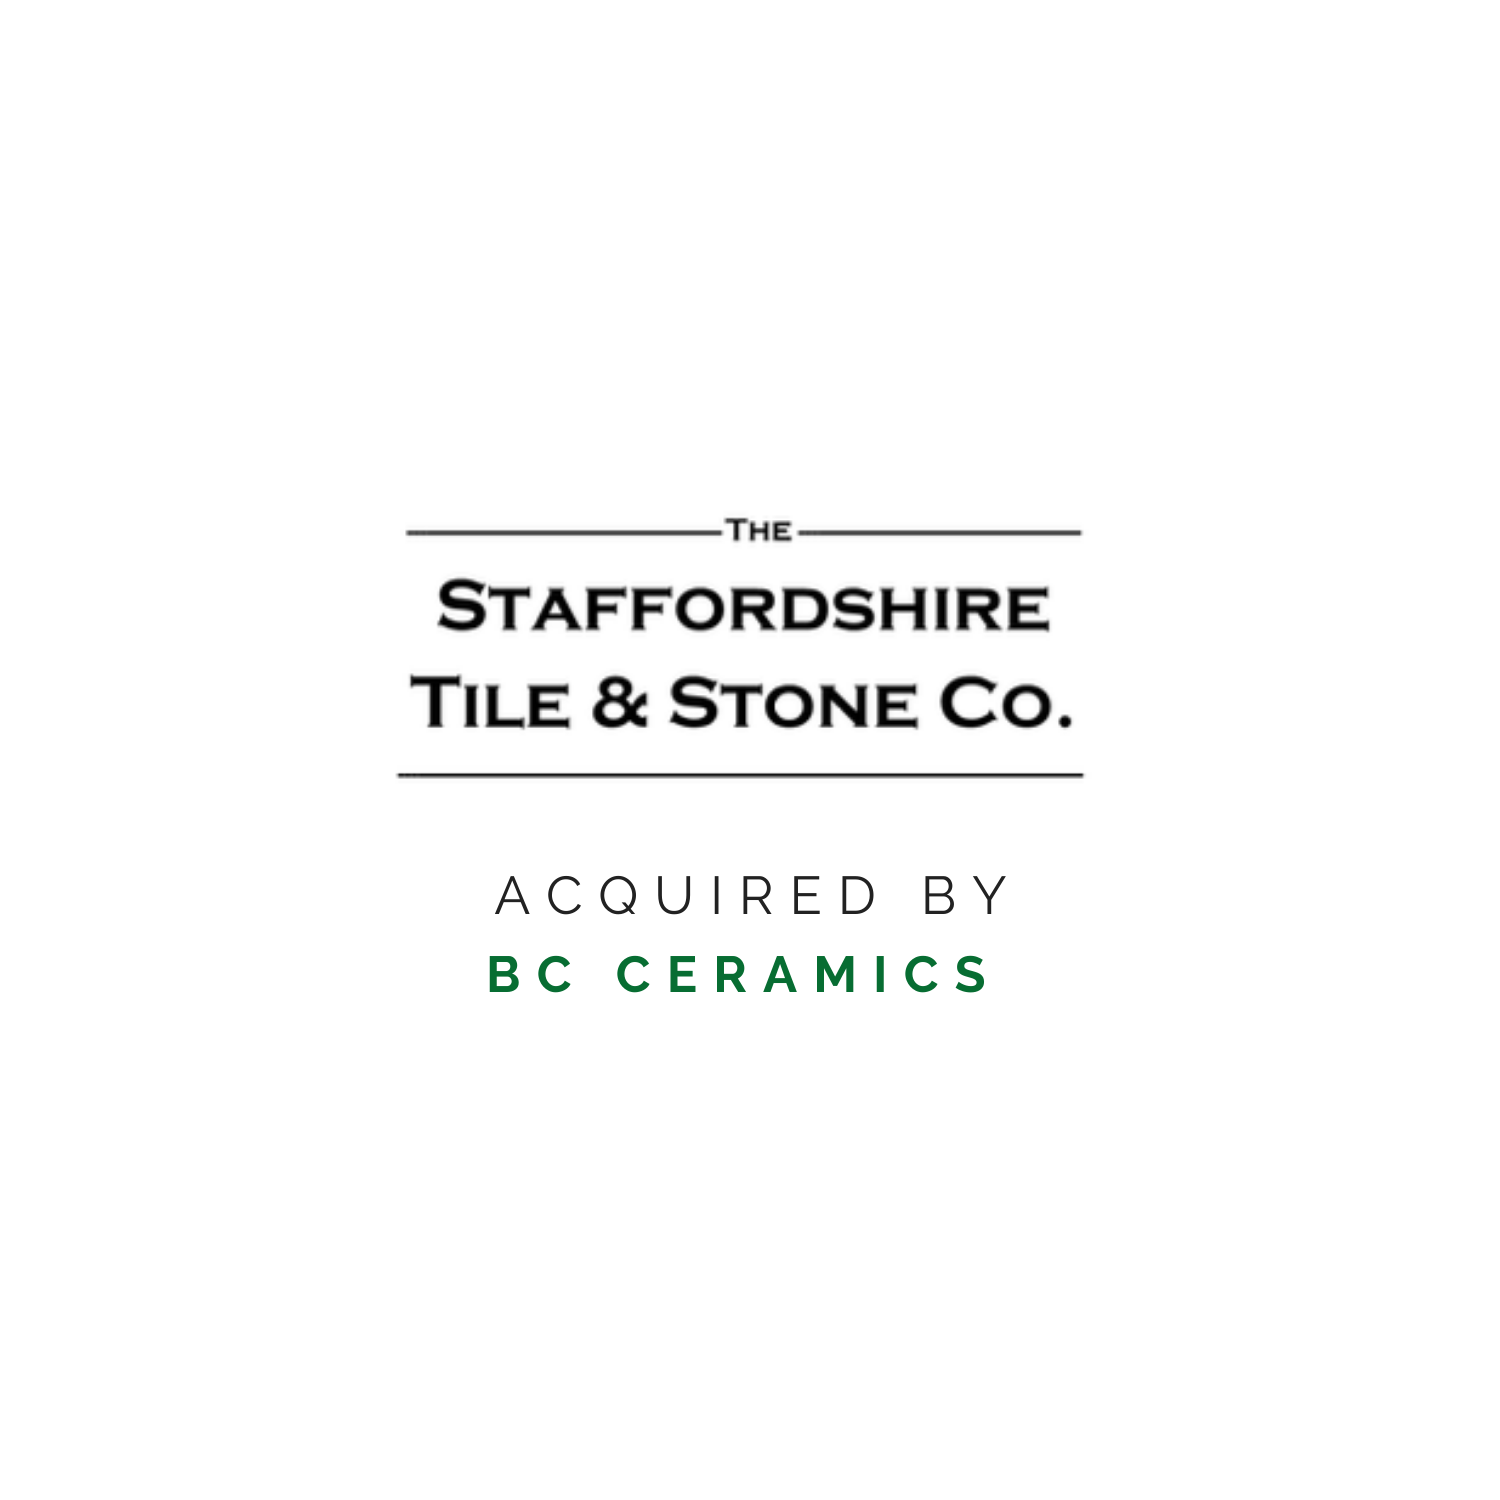 Sale of Wholesaler & Retail Distributor of Tile and Stone